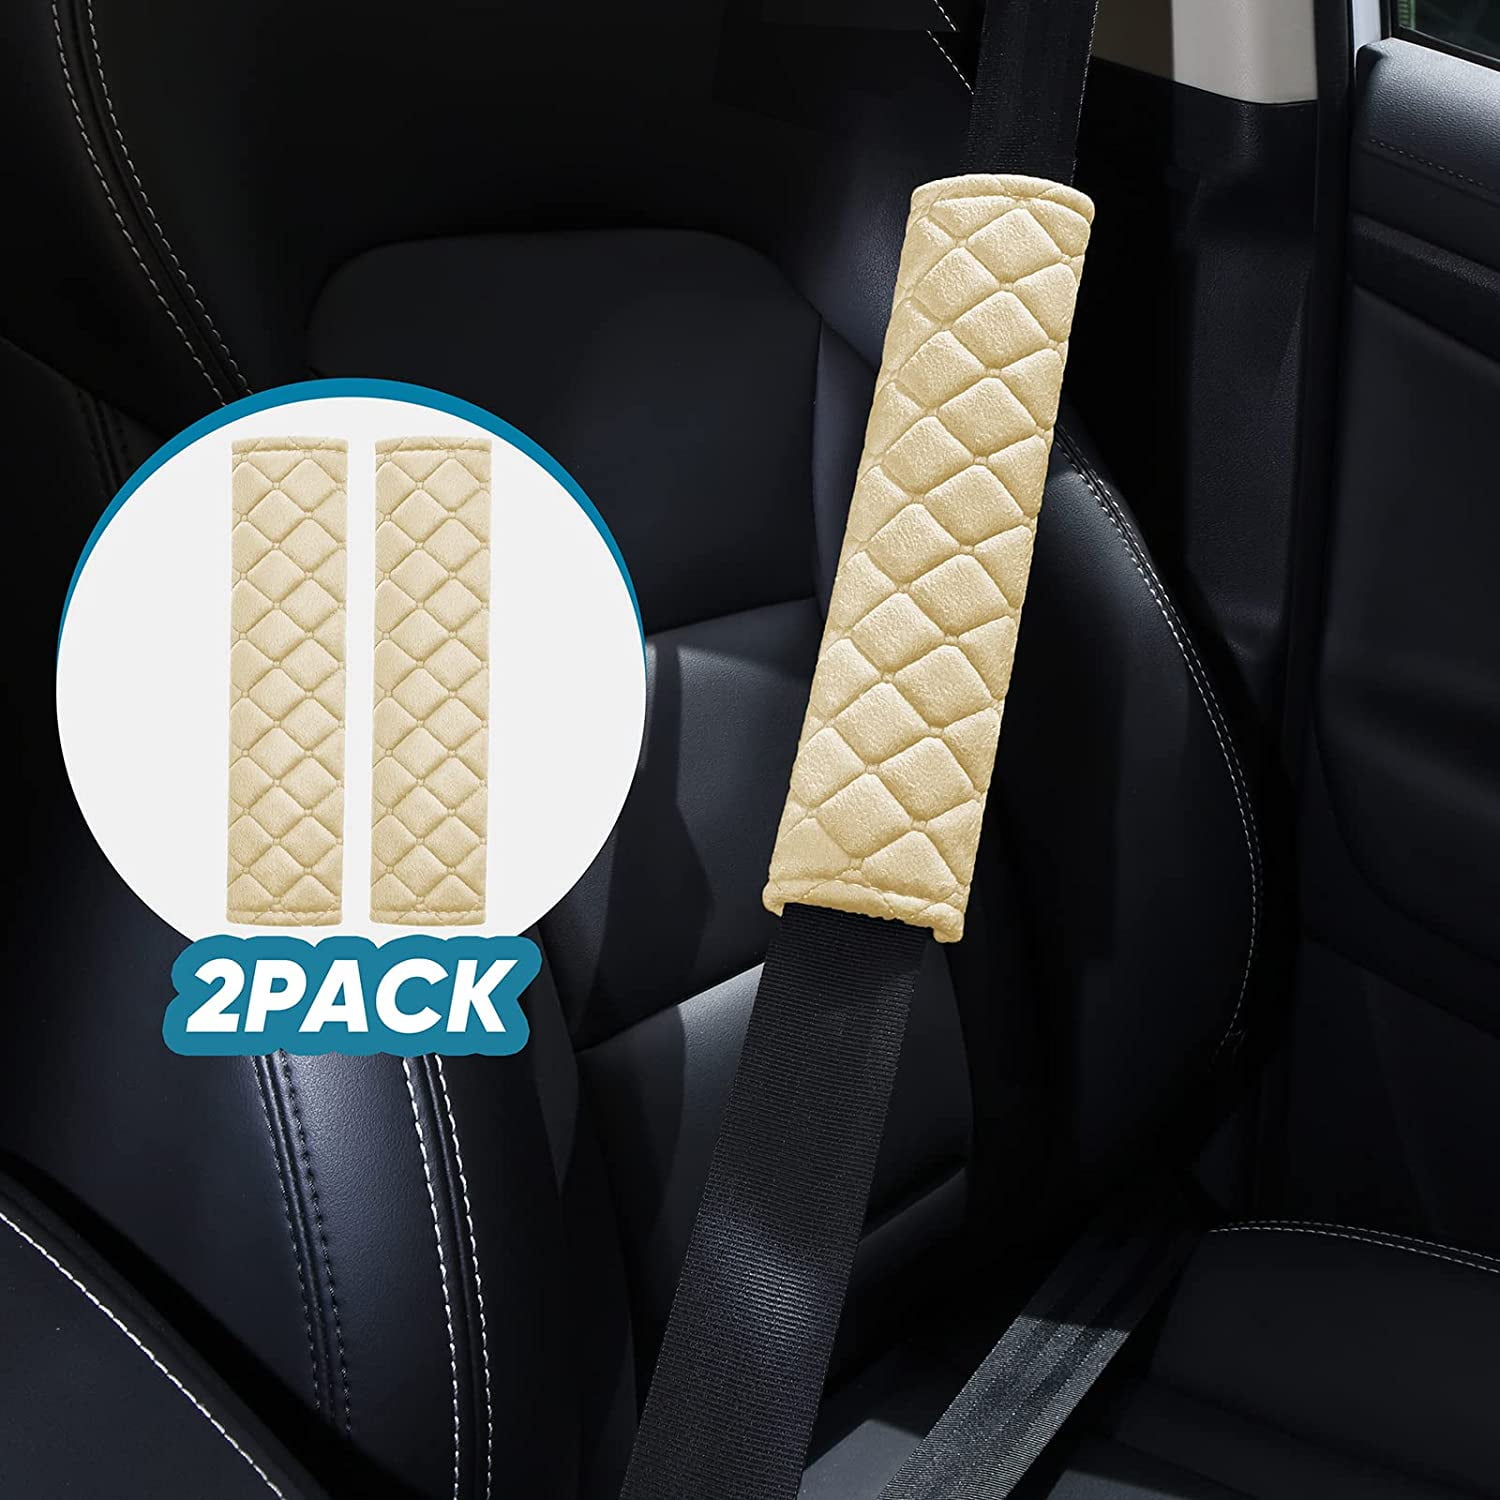 Casewin 1 Pair Car Seat Belt Pads Seatbelt Protector Soft Comfort Seat Belt  Shoulder Strap Covers Harness Pads Helps Protect Your Neck and Shoulder  Protection Pad Cover 